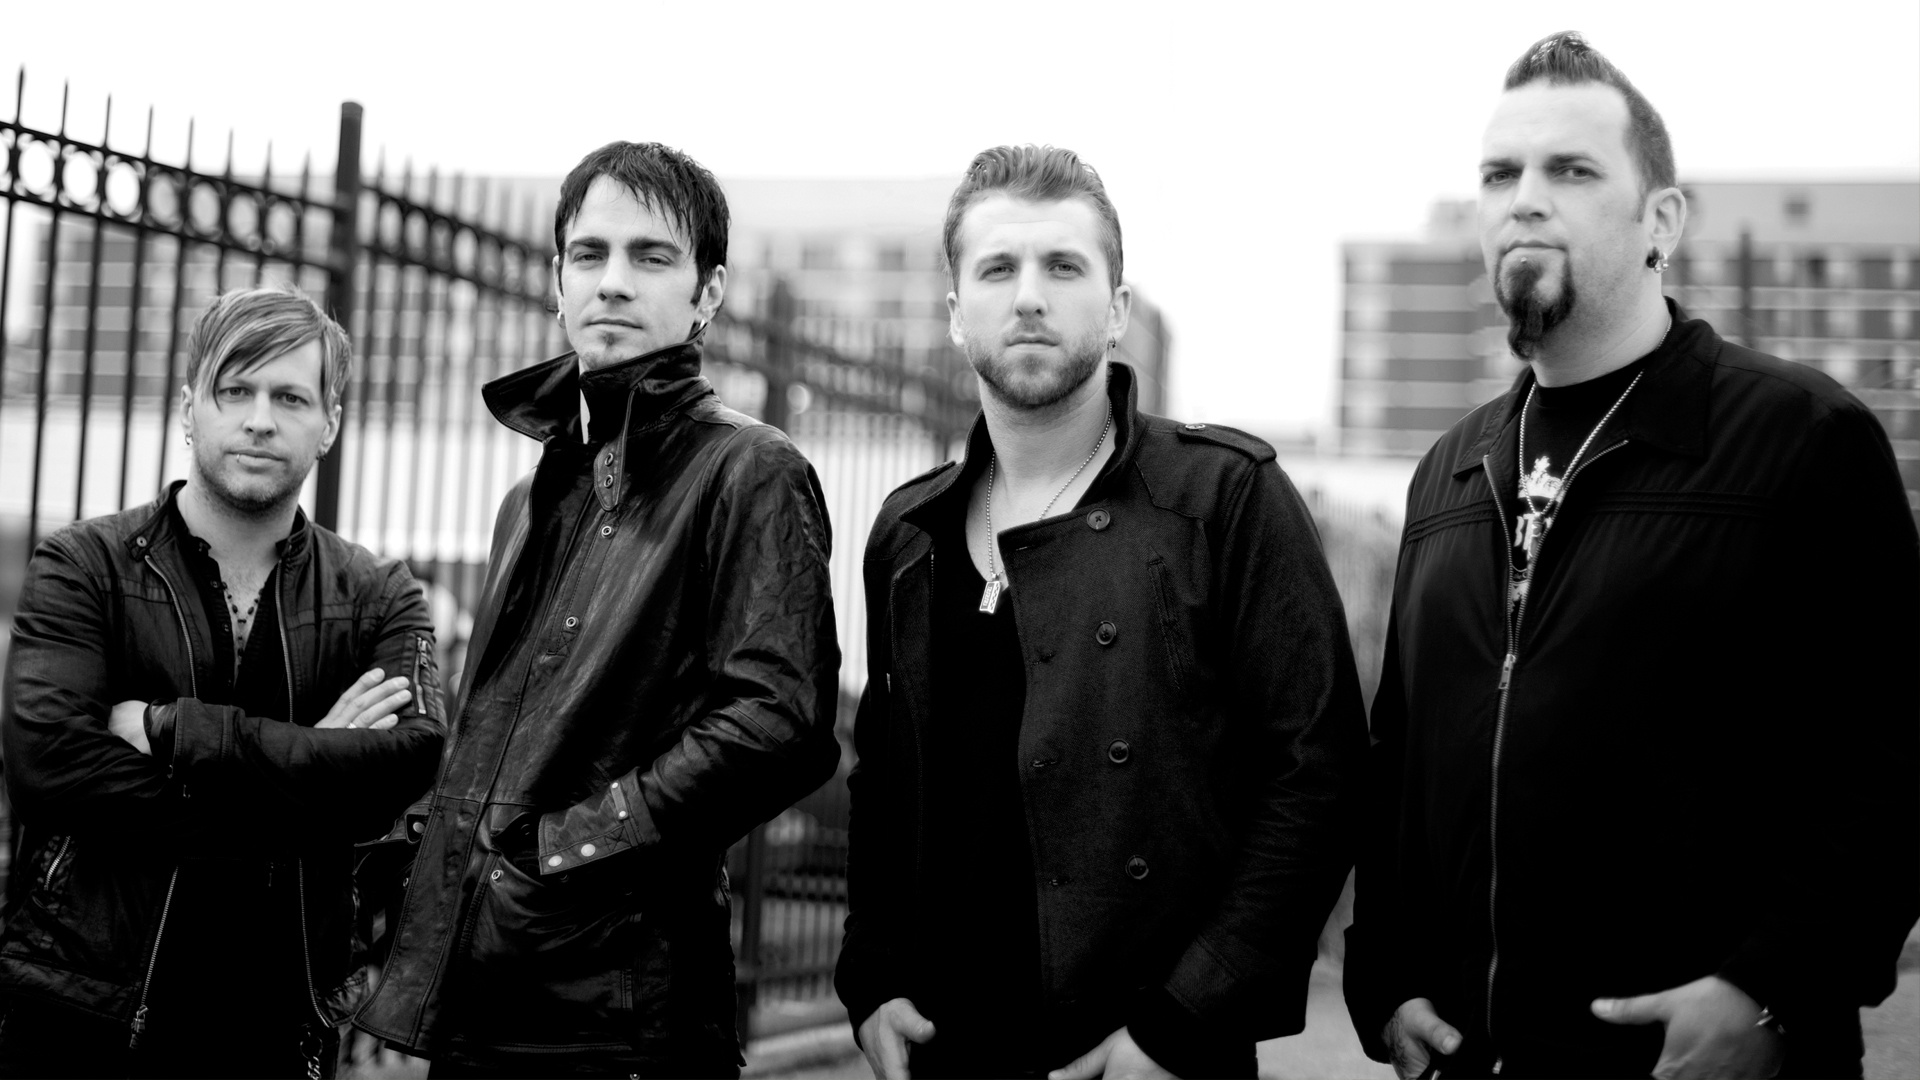 Three Days Grace: Nominated for the 2016 Juno Award for Group of the Year, Black and white. 1920x1080 Full HD Wallpaper.